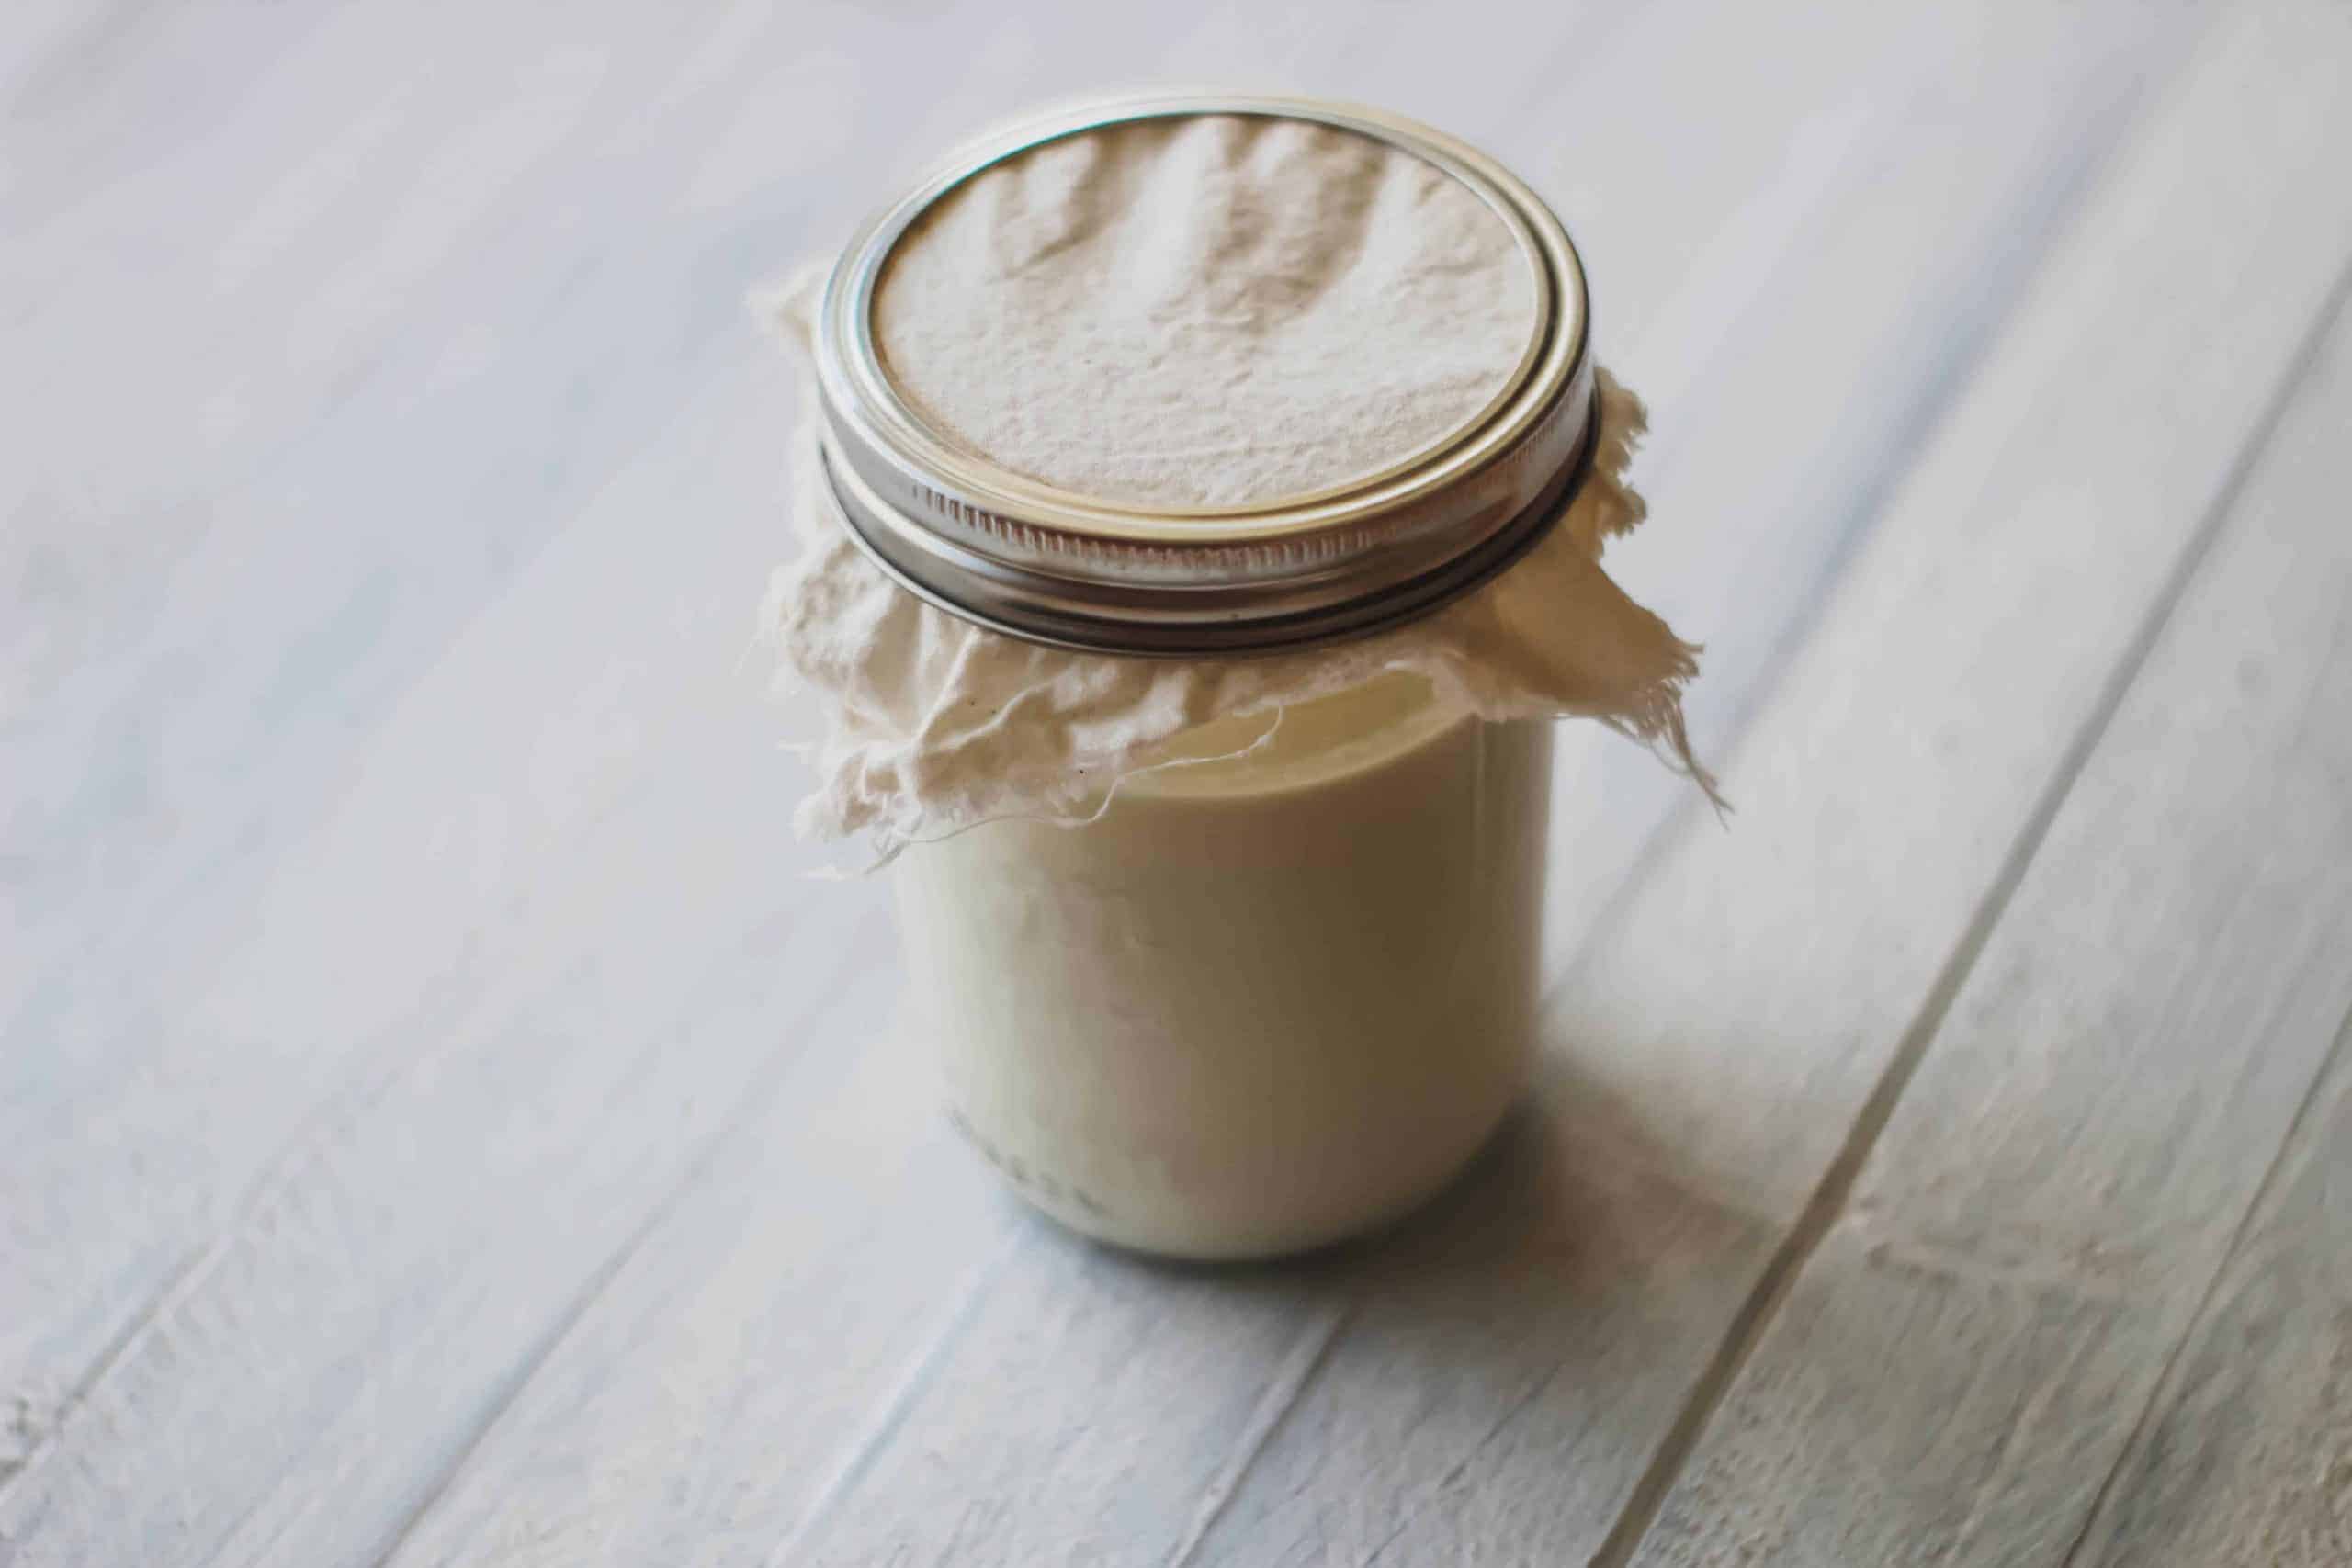 How to make kefir with raw milk